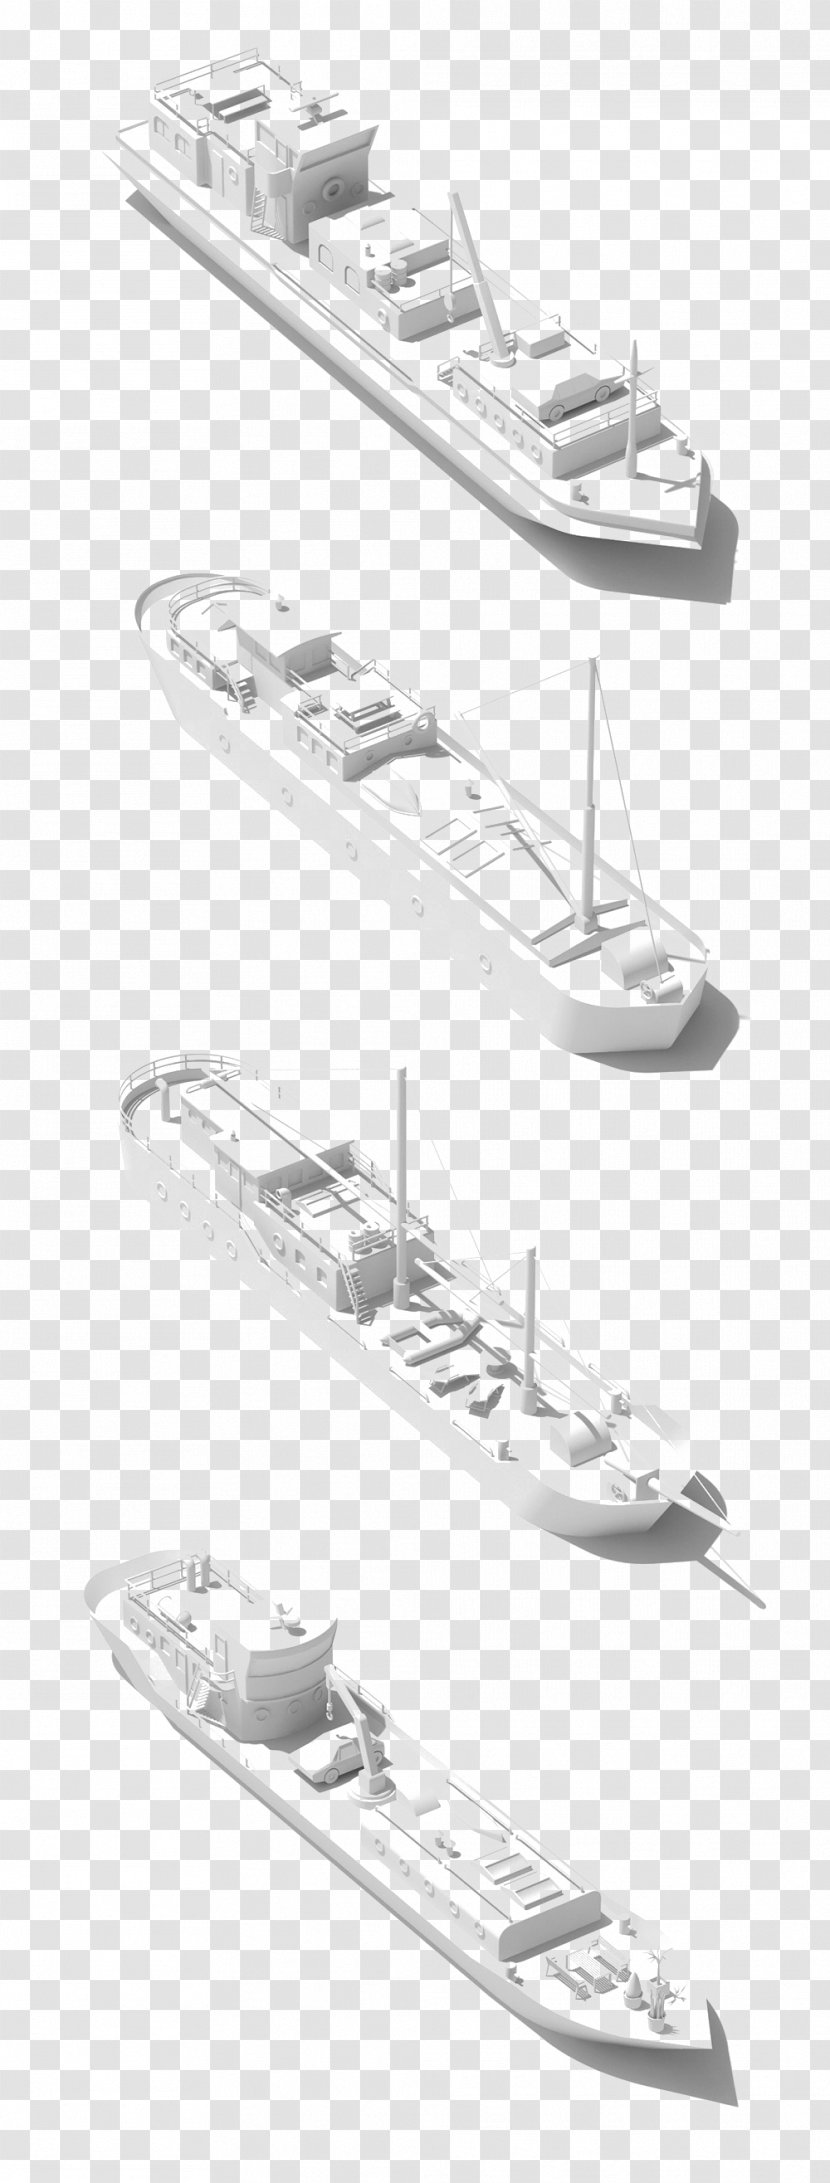 Typography Ship - Structure - Boat Painted Artwork Transparent PNG